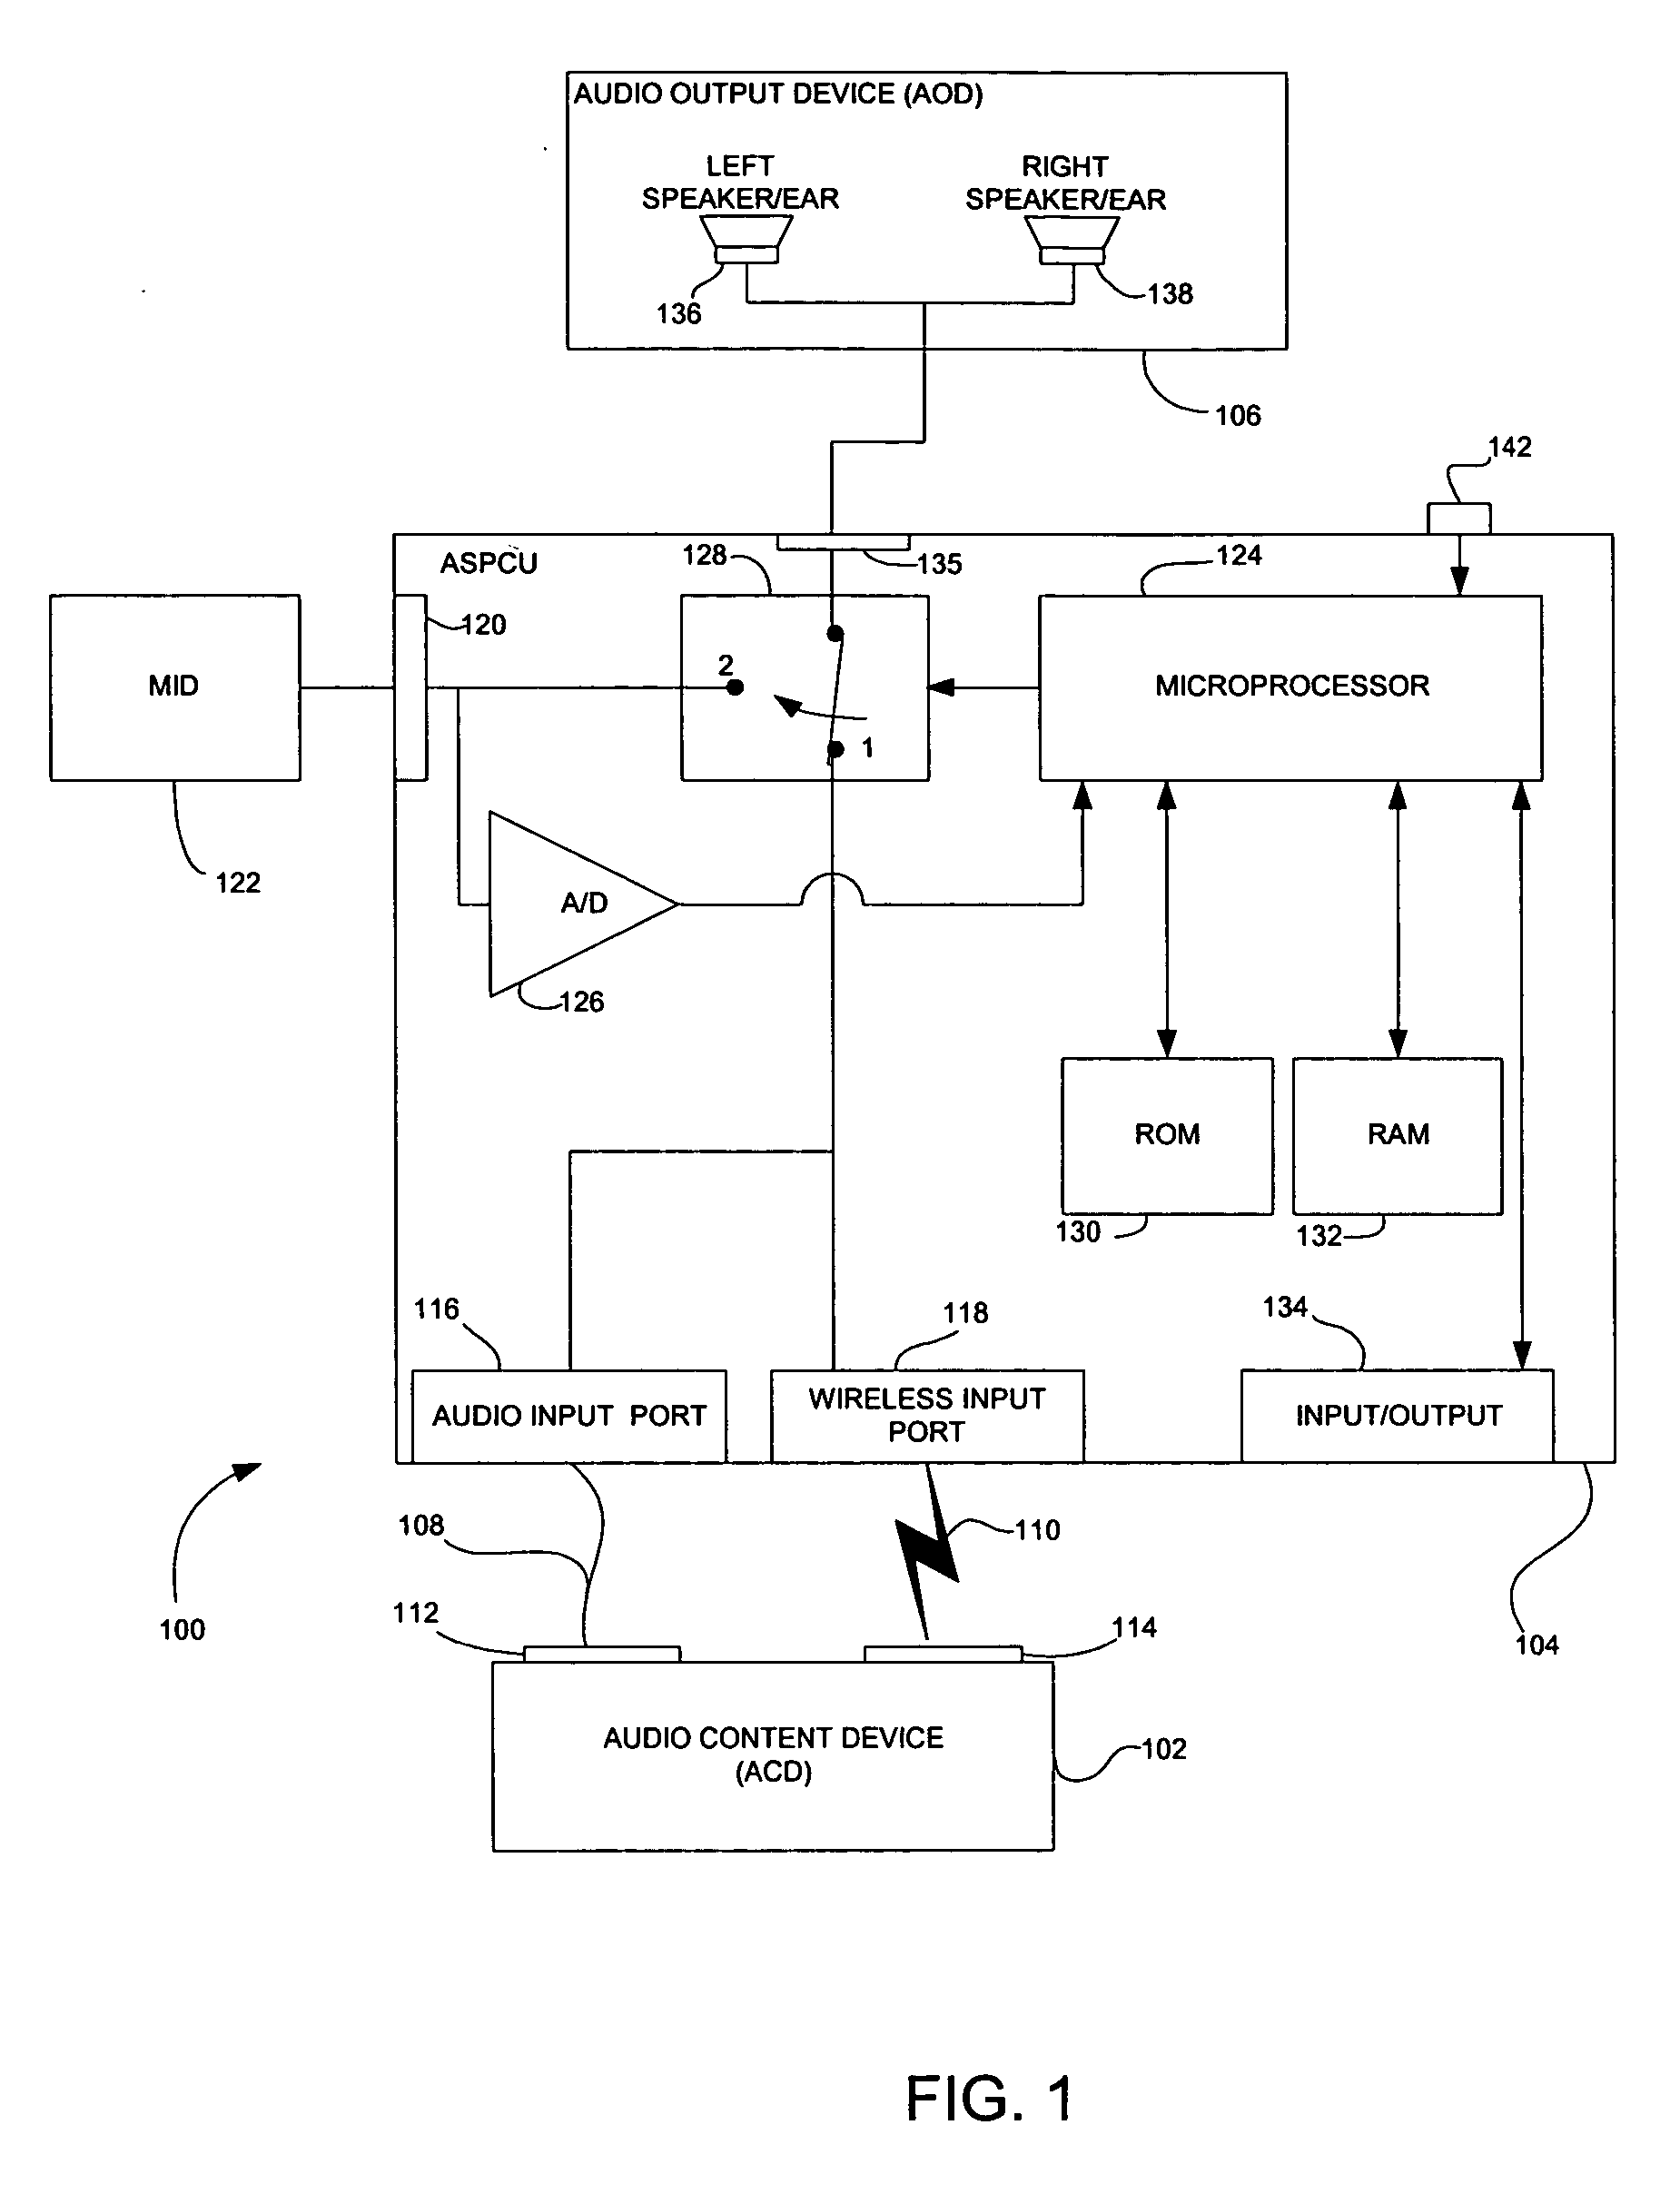 System and method for selectively switching between a plurality of audio channels